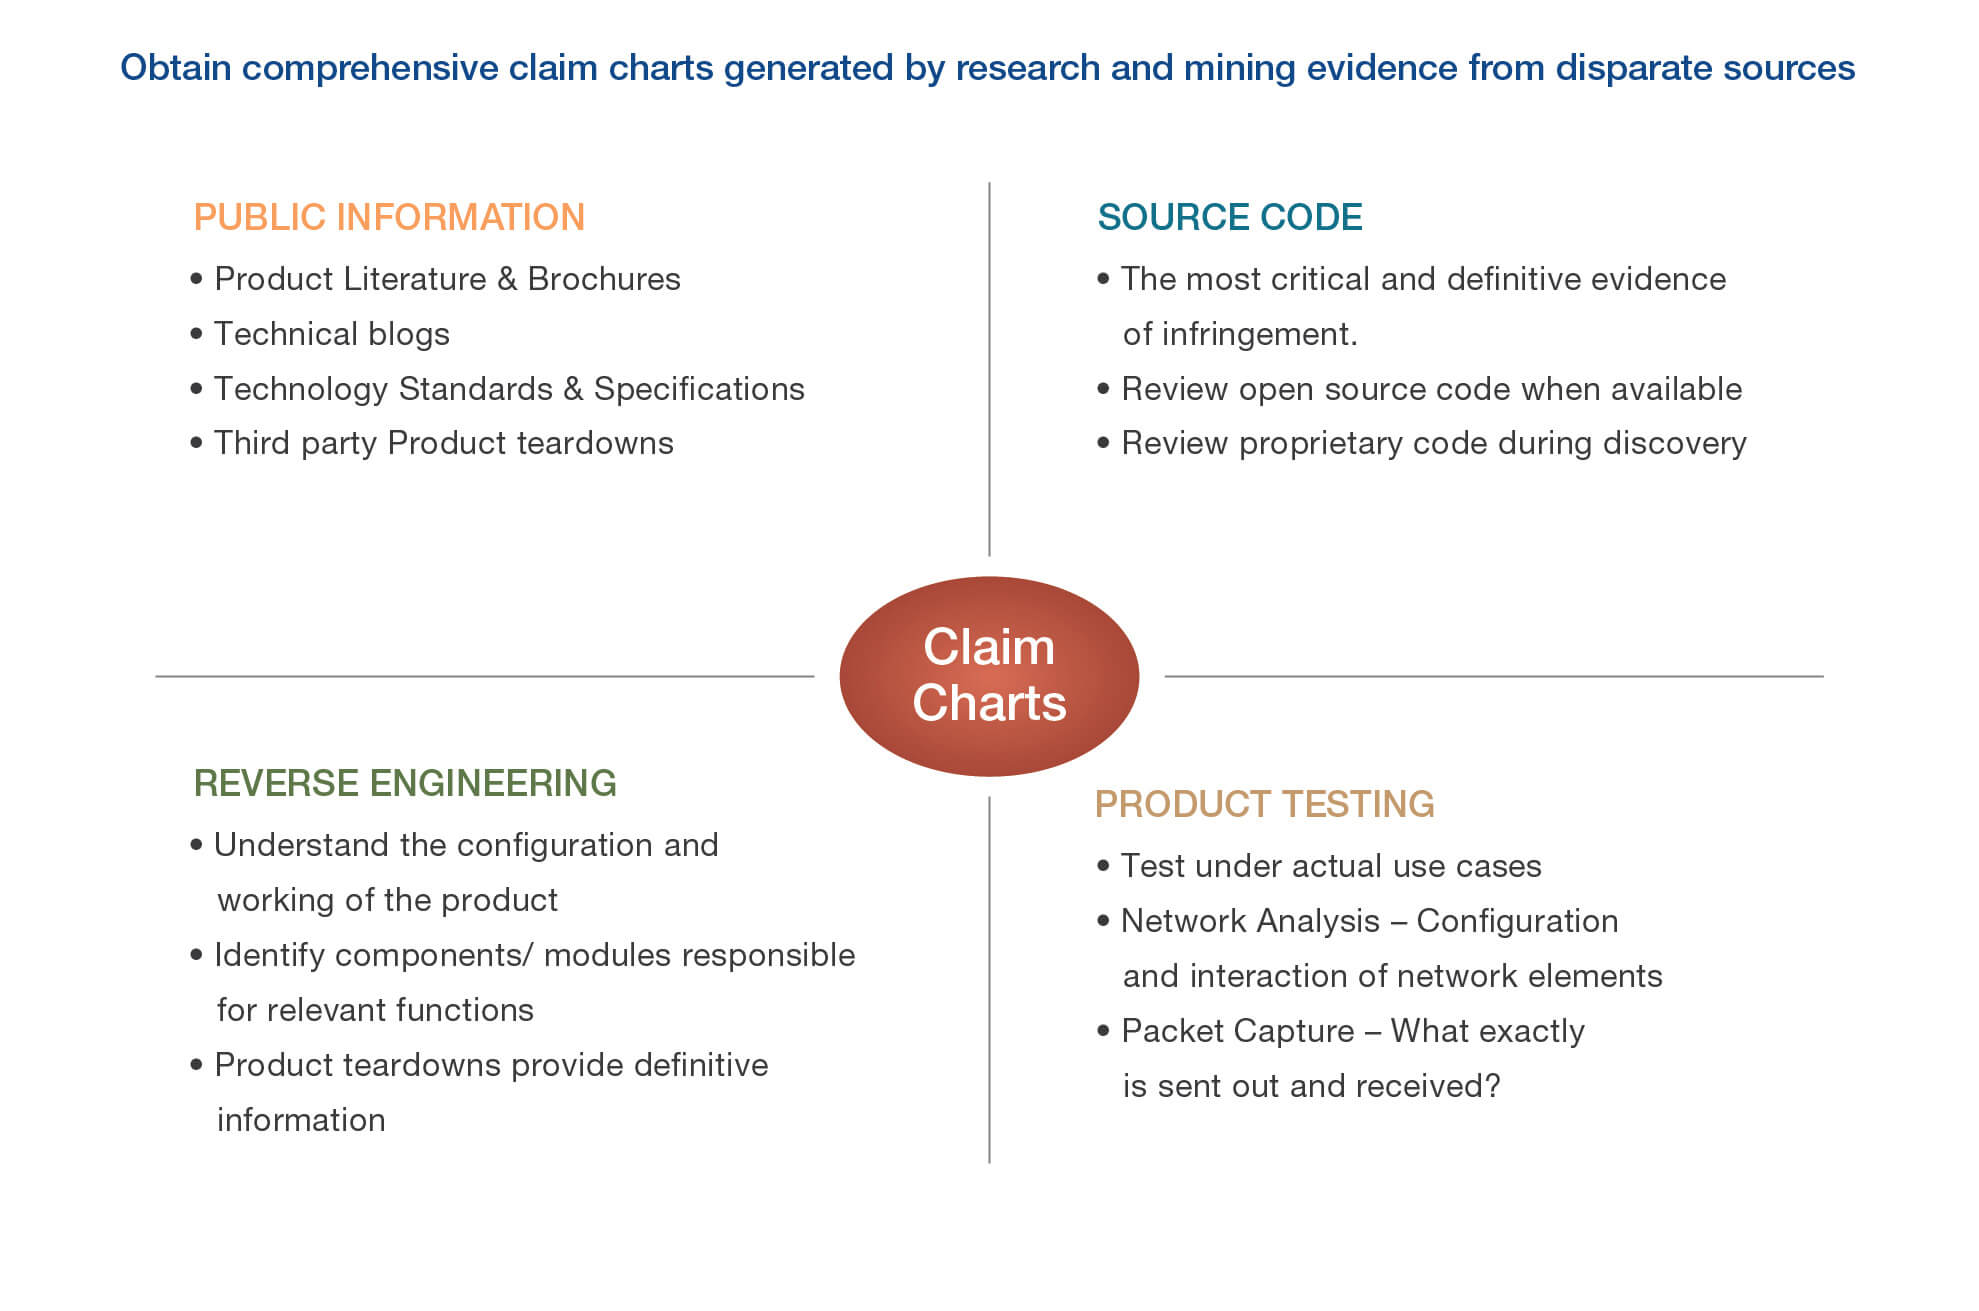 Comprehensive Claim Charts from disparate sources of evidence